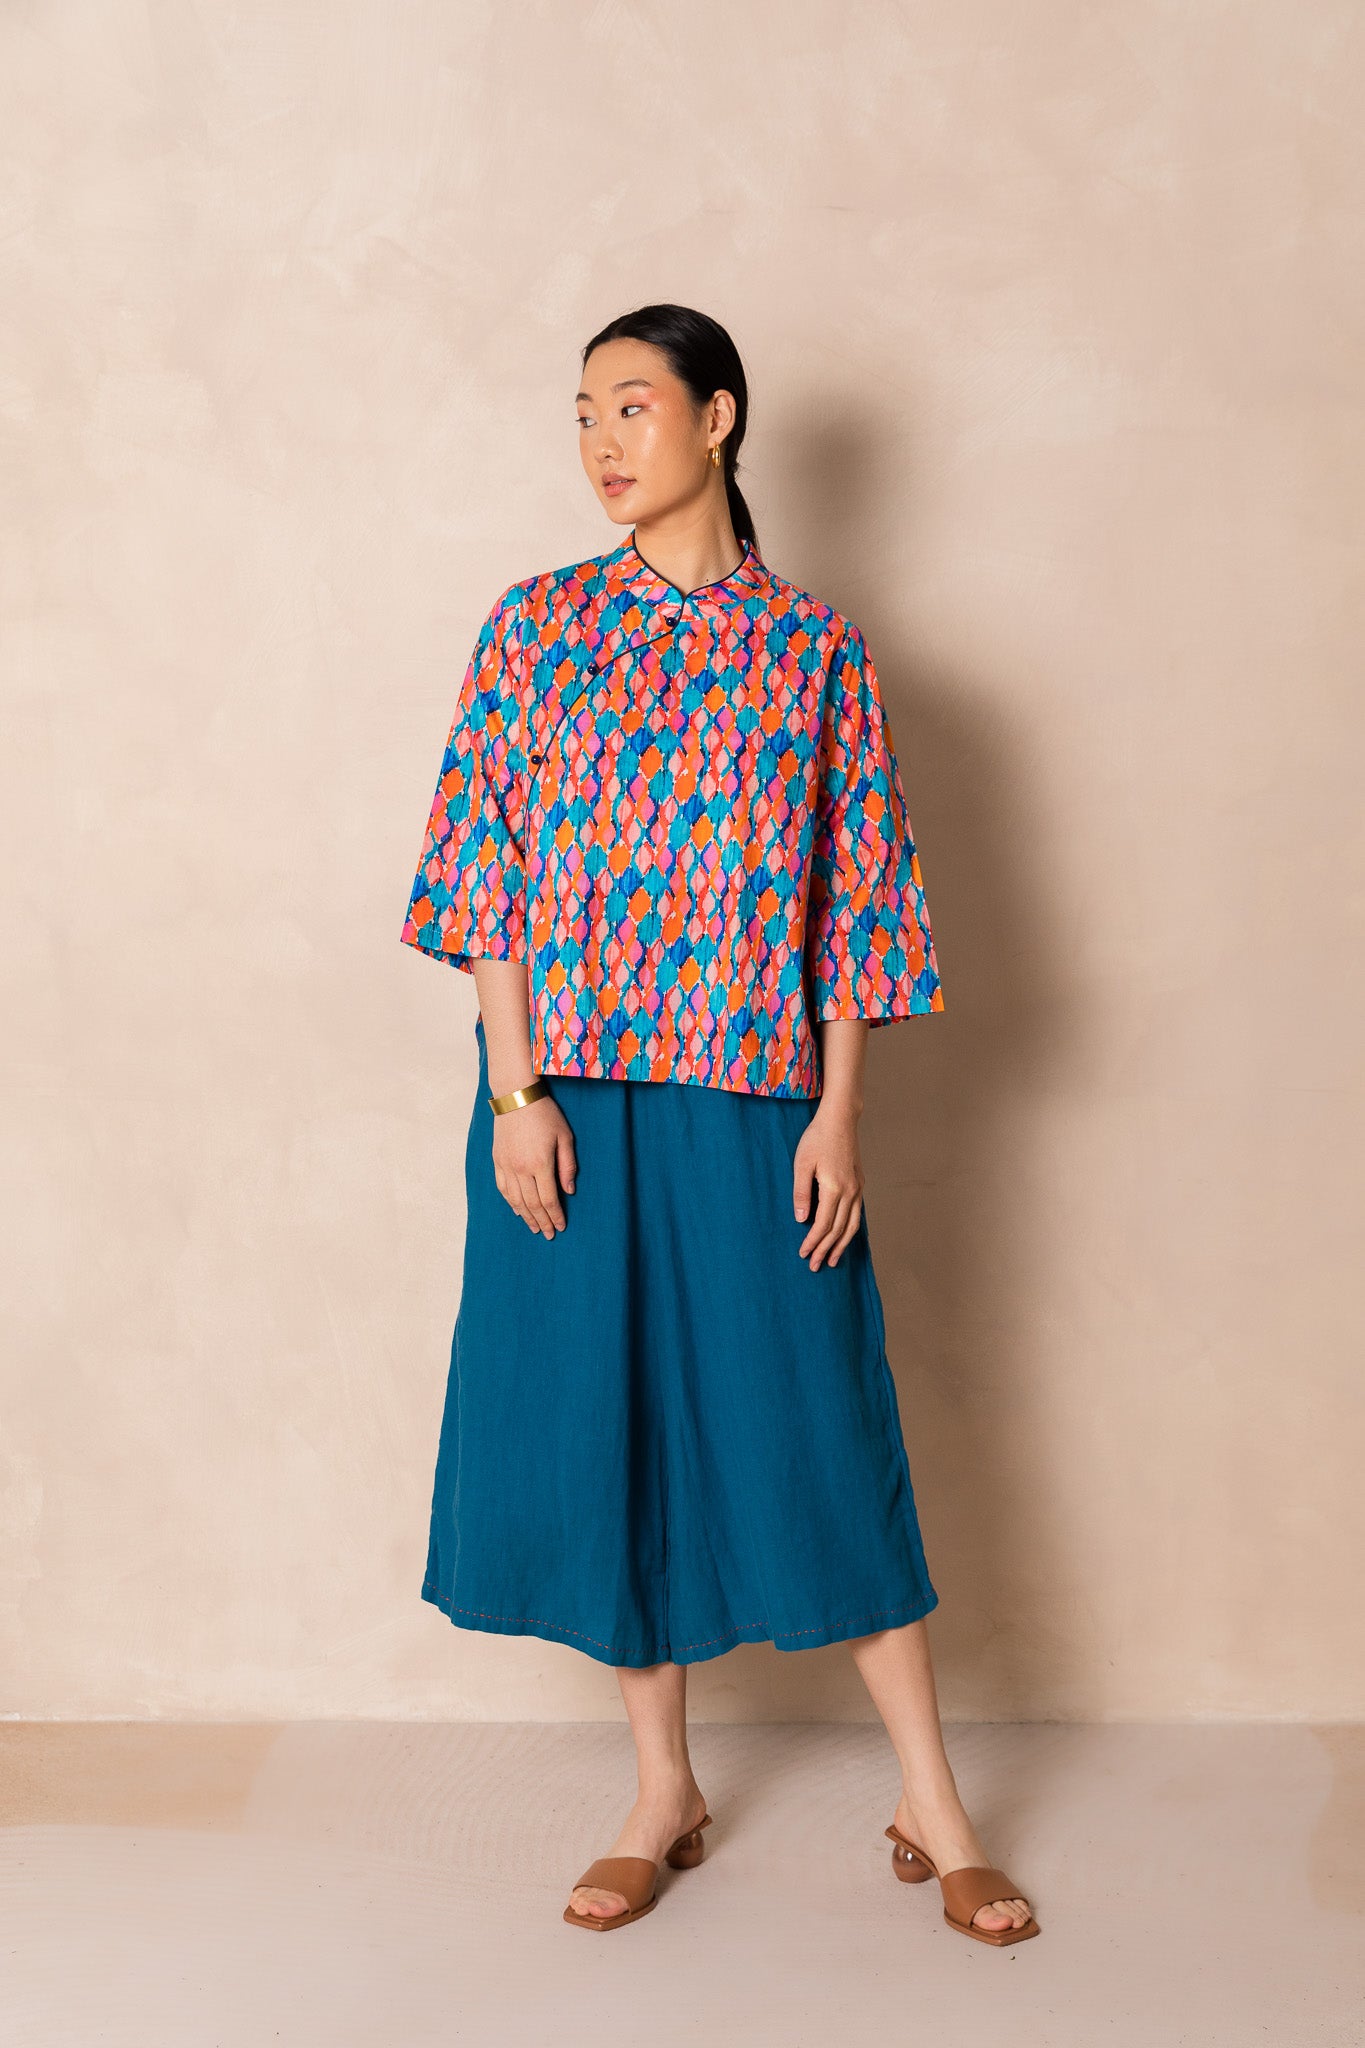 Water Colour Geometric Print 3/4 Sleeve Cheongsam Top, available on You Living